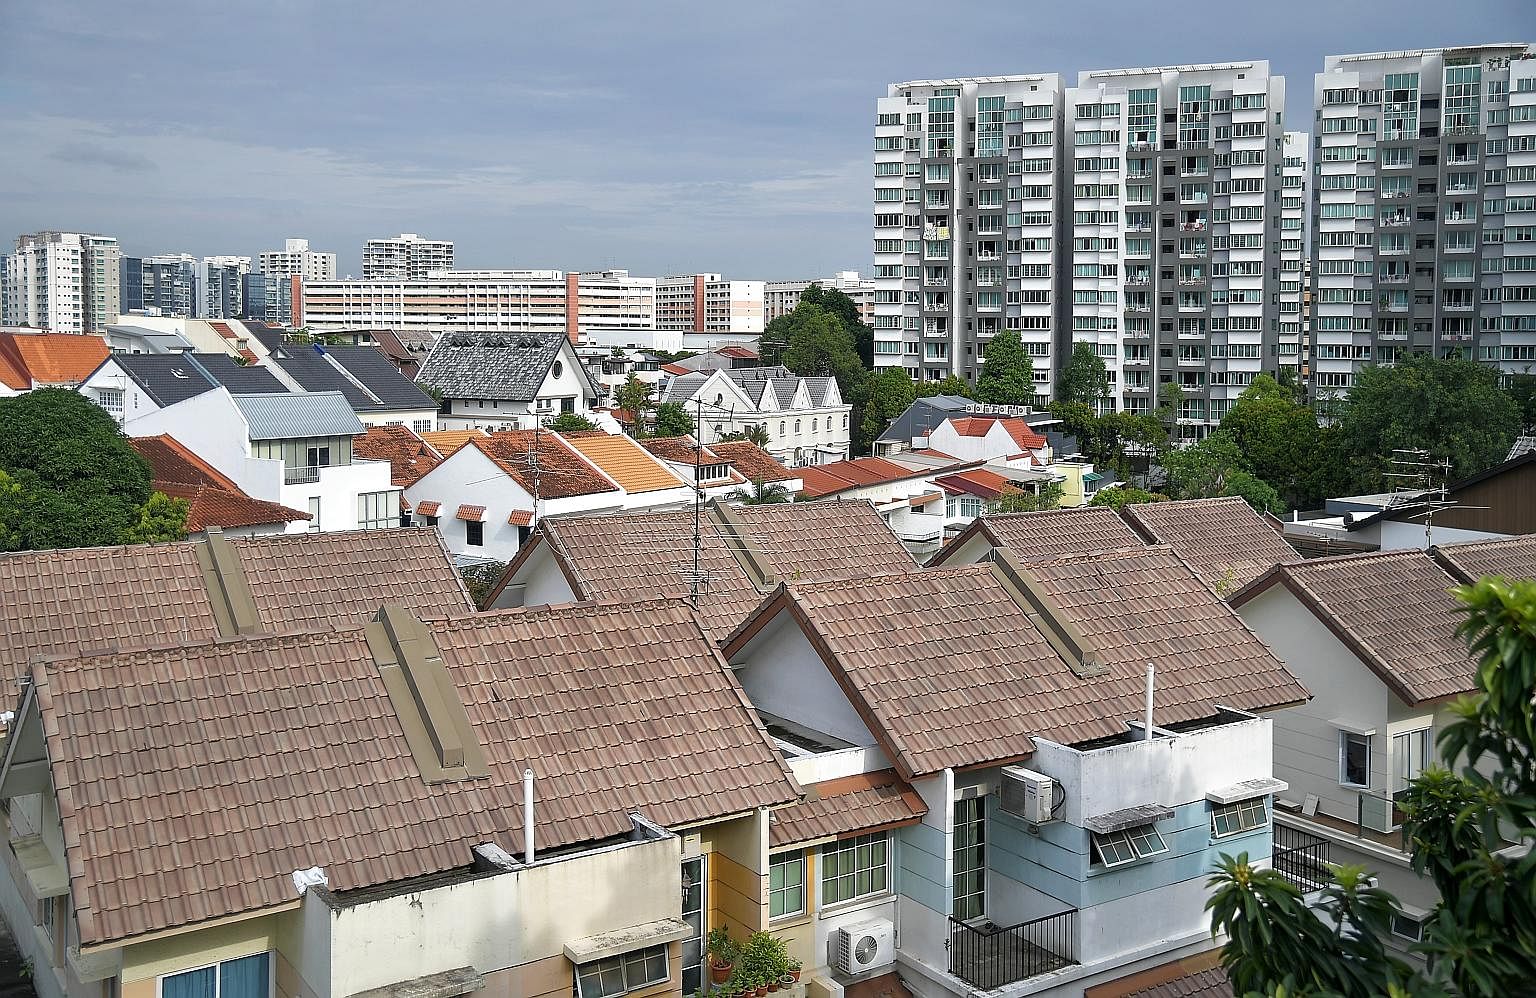 Singapore's situation is complex due to its high density, and the majority of private home owners live in strata-titled properties, said Mr Lawrence Wong. He said that in such properties, it is not just about what one person wants to do - his neighbo